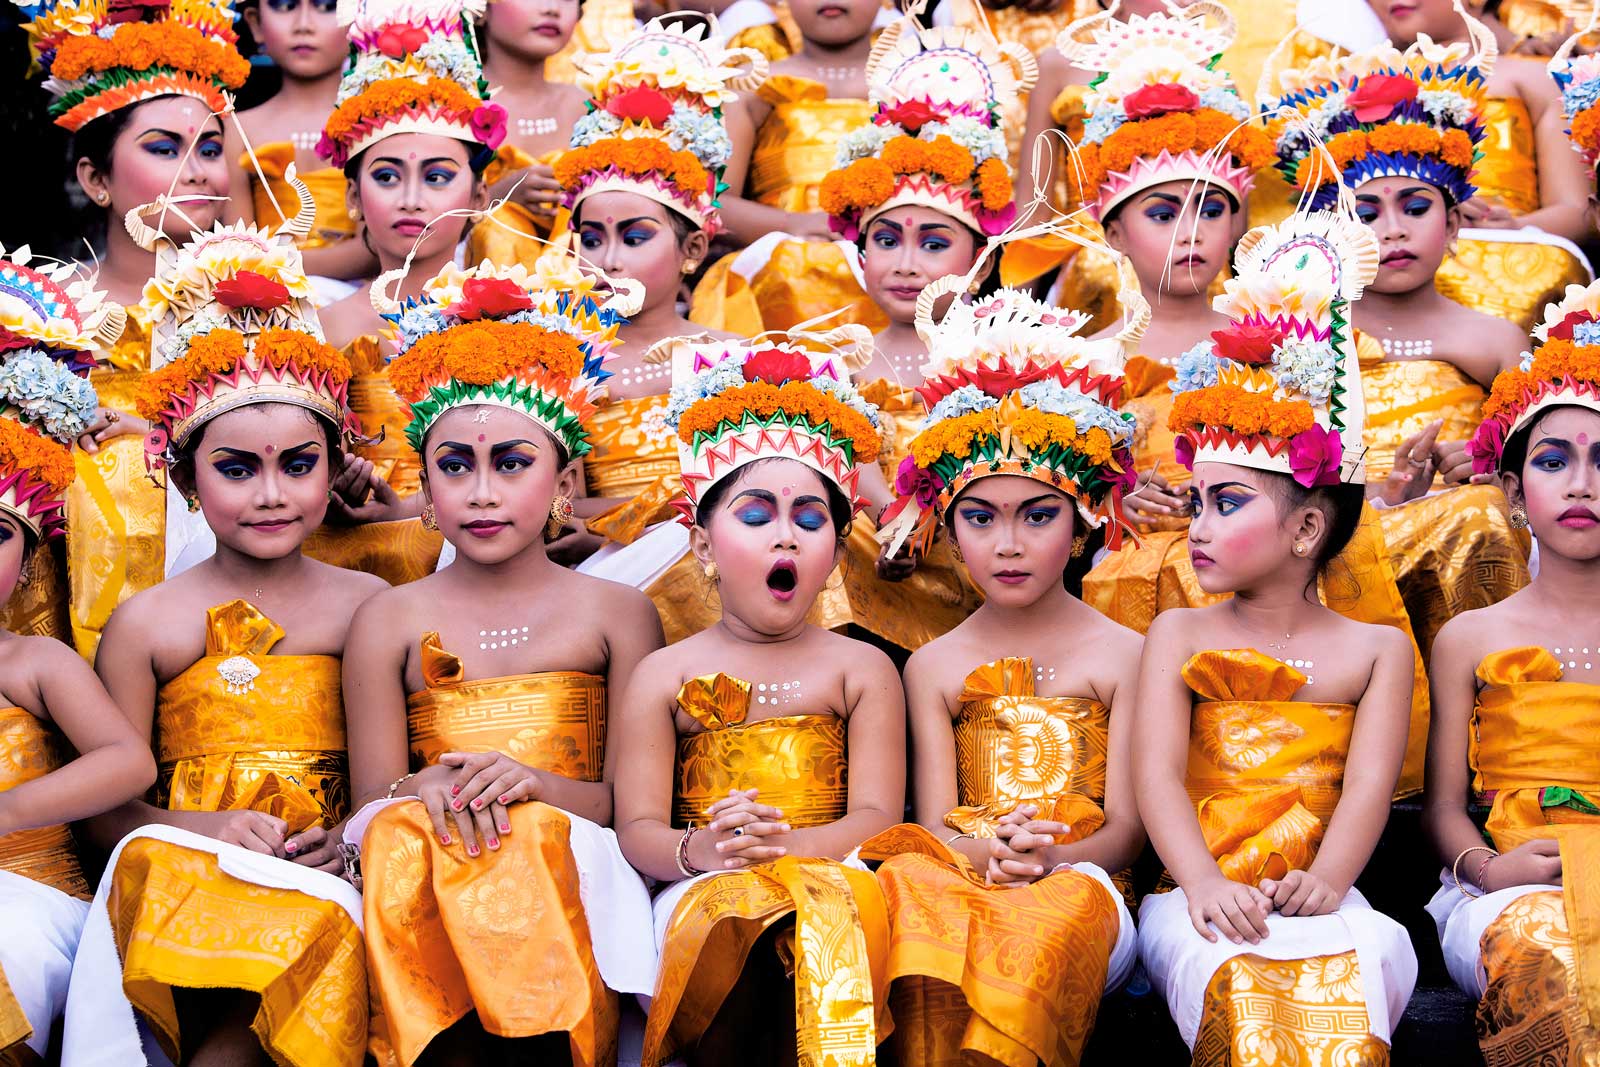 Young girls wait for their turn to perform at the Melasti Festival in Bali, which is conducted once a year in conjunction with Nyepi or Silent Day.